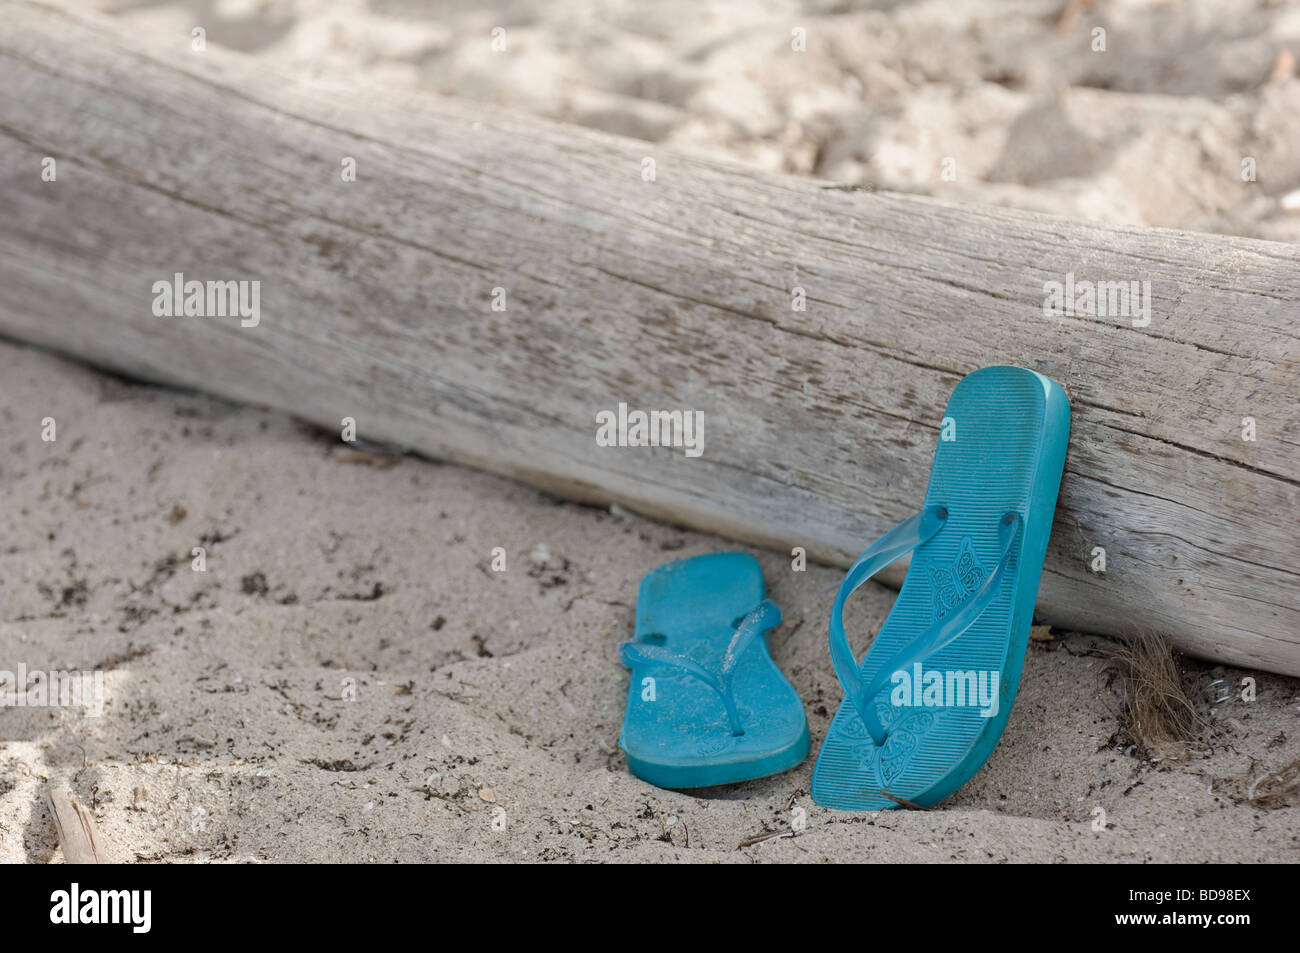 pair of blue sandals left behind on beach against driftwood log Stock Photo